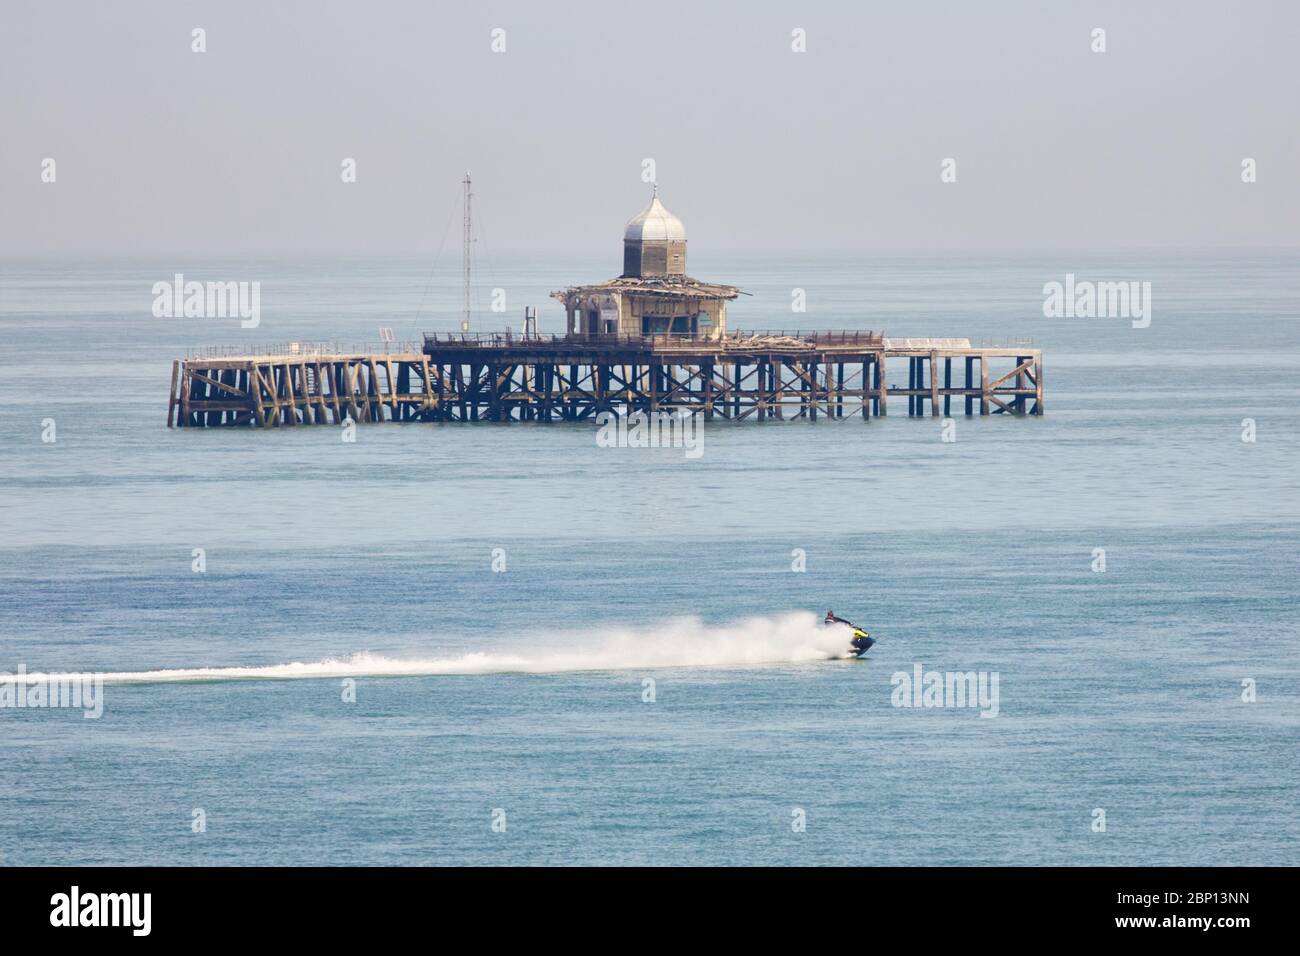 Herne Bay, Kent, UK. 17th May 2020: UK Weather. Jet Skiers take advantage of the sunshine and calm conditions to have fun around the abandoned old pier head at Herne Bay as restrictions on the lockdown are eased. The weather is set to remain good for the next few days. Credit: Alan Payton/Alamy Live News Stock Photo